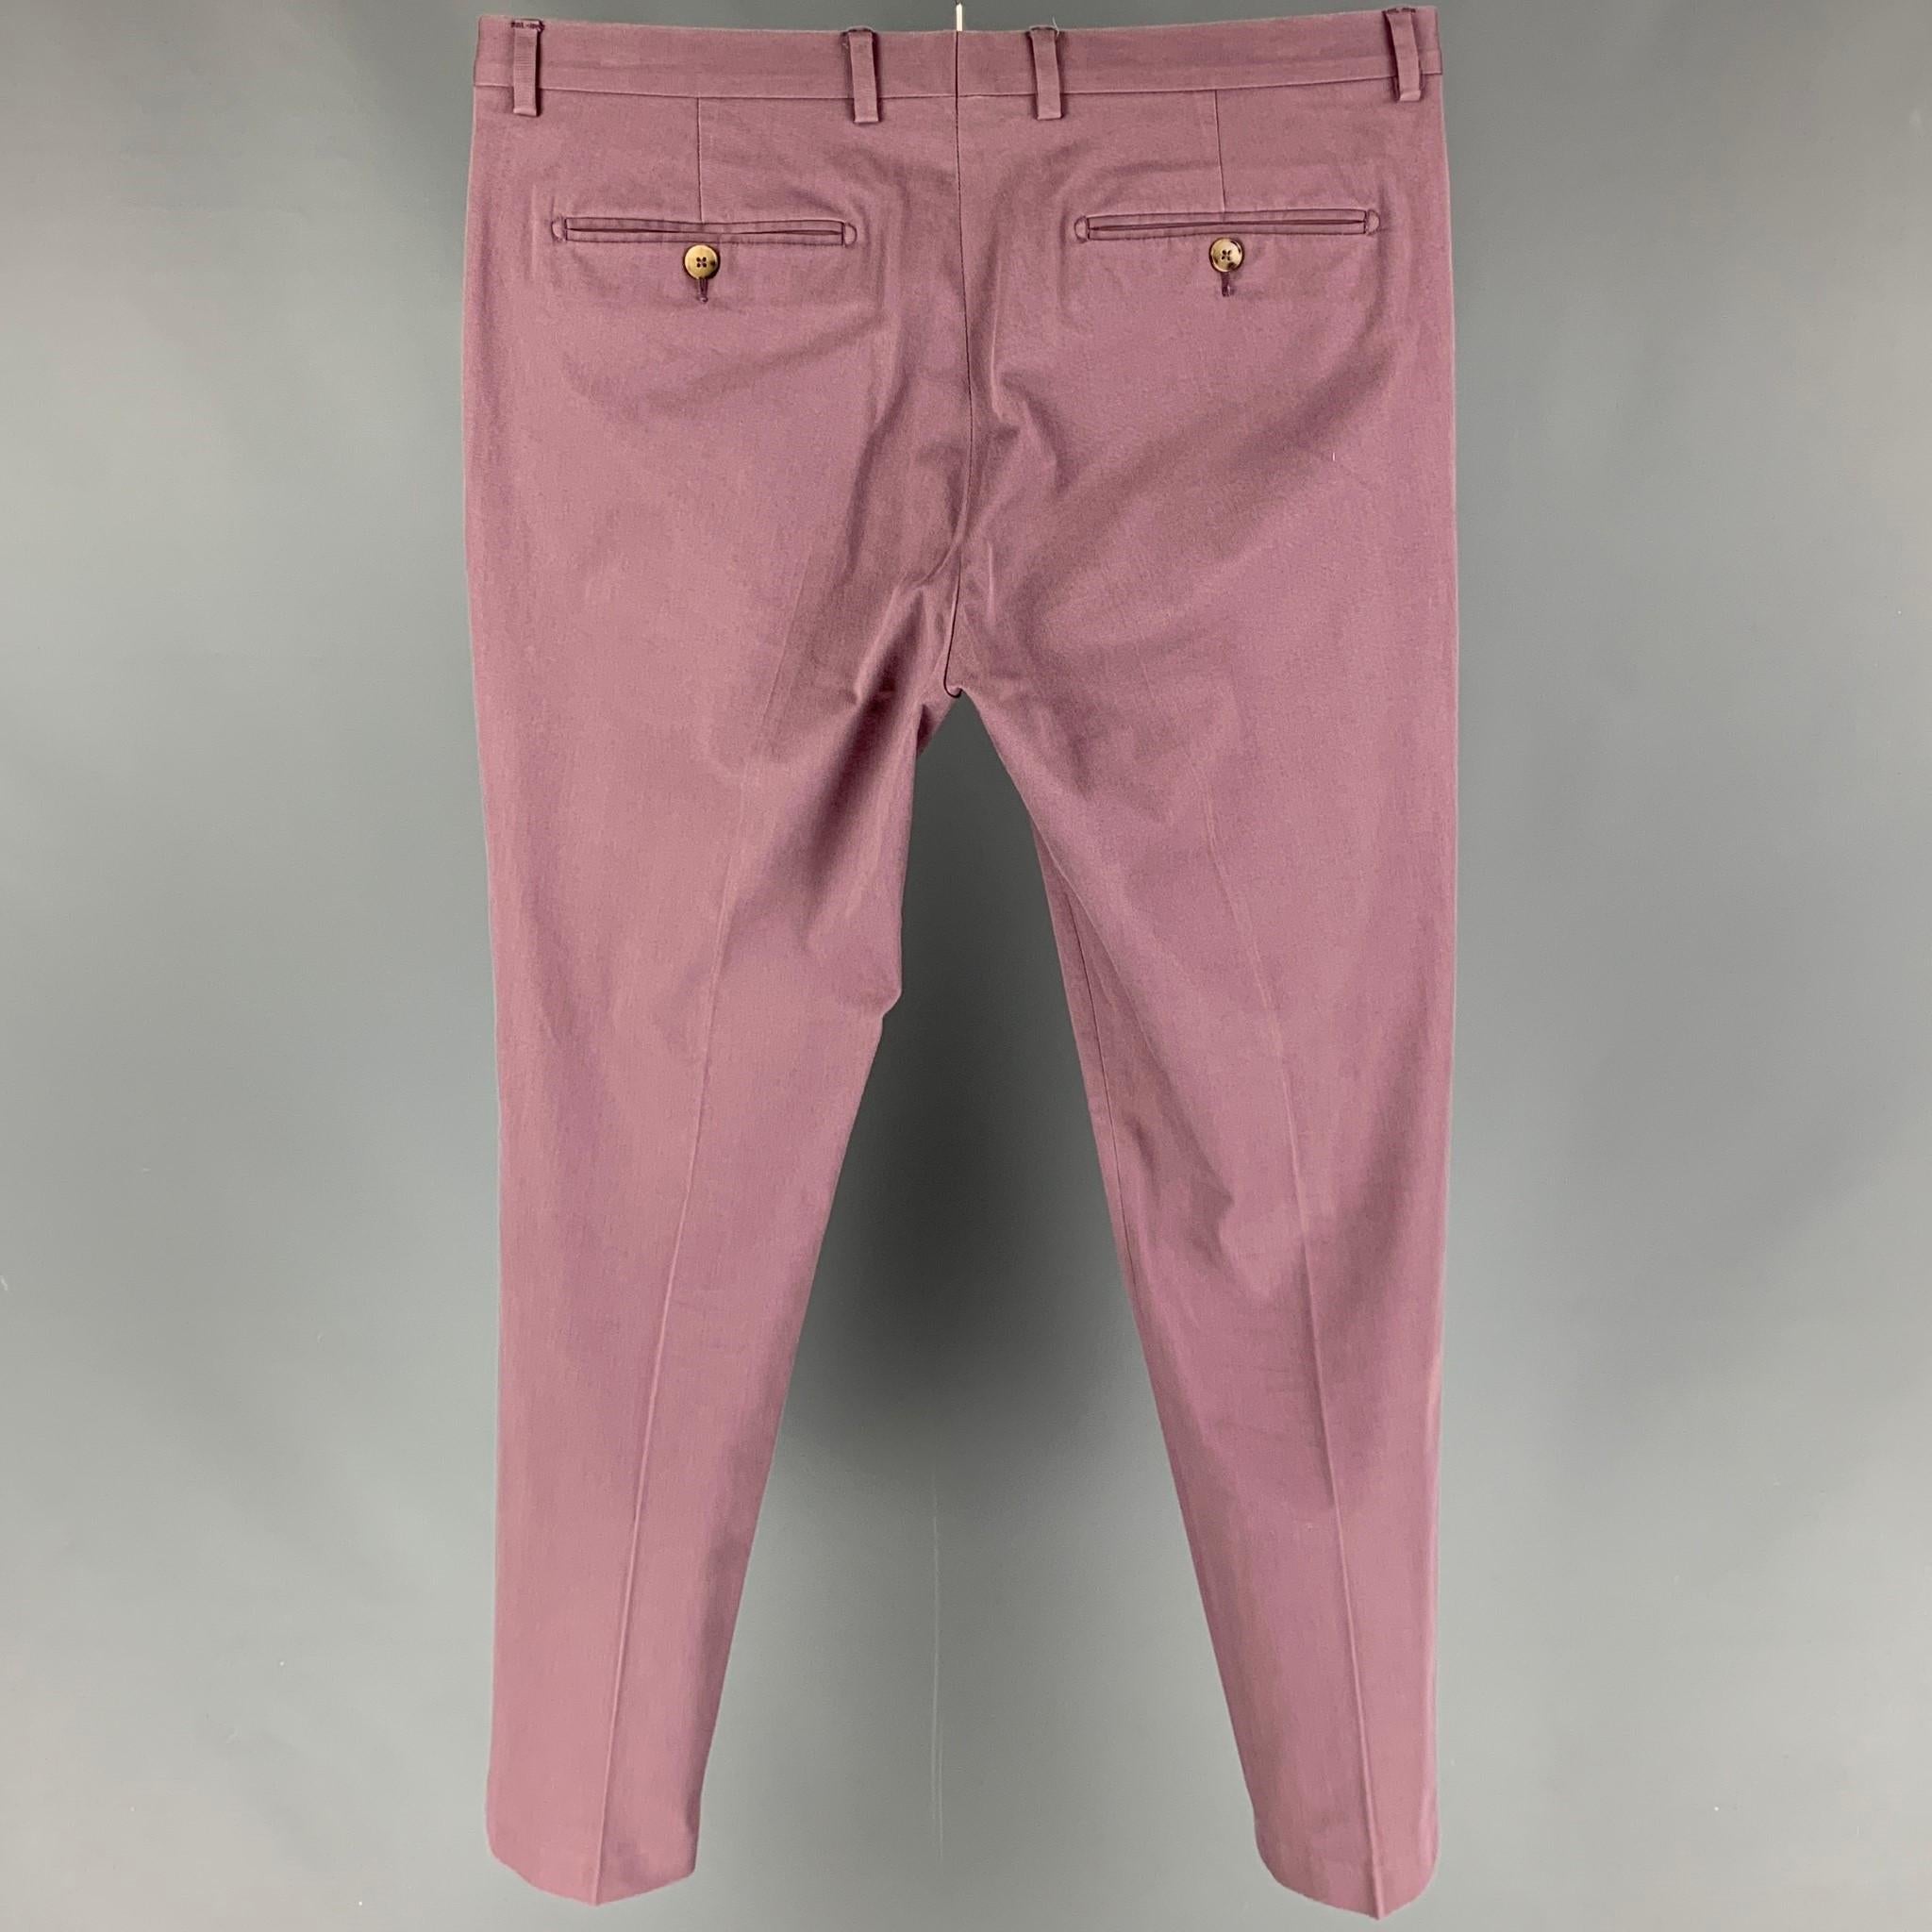 GUCCI pants comes in a purple cotton featuring a flat front, slim fit, front tab, and a zip fly closure. 

Very Good Pre-Owned Condition. Fabric tag removed.
Marked: Size tag removed.

Measurements:

Waist: 35 in.
Rise: 9.5 in.
Inseam: 31 in. 